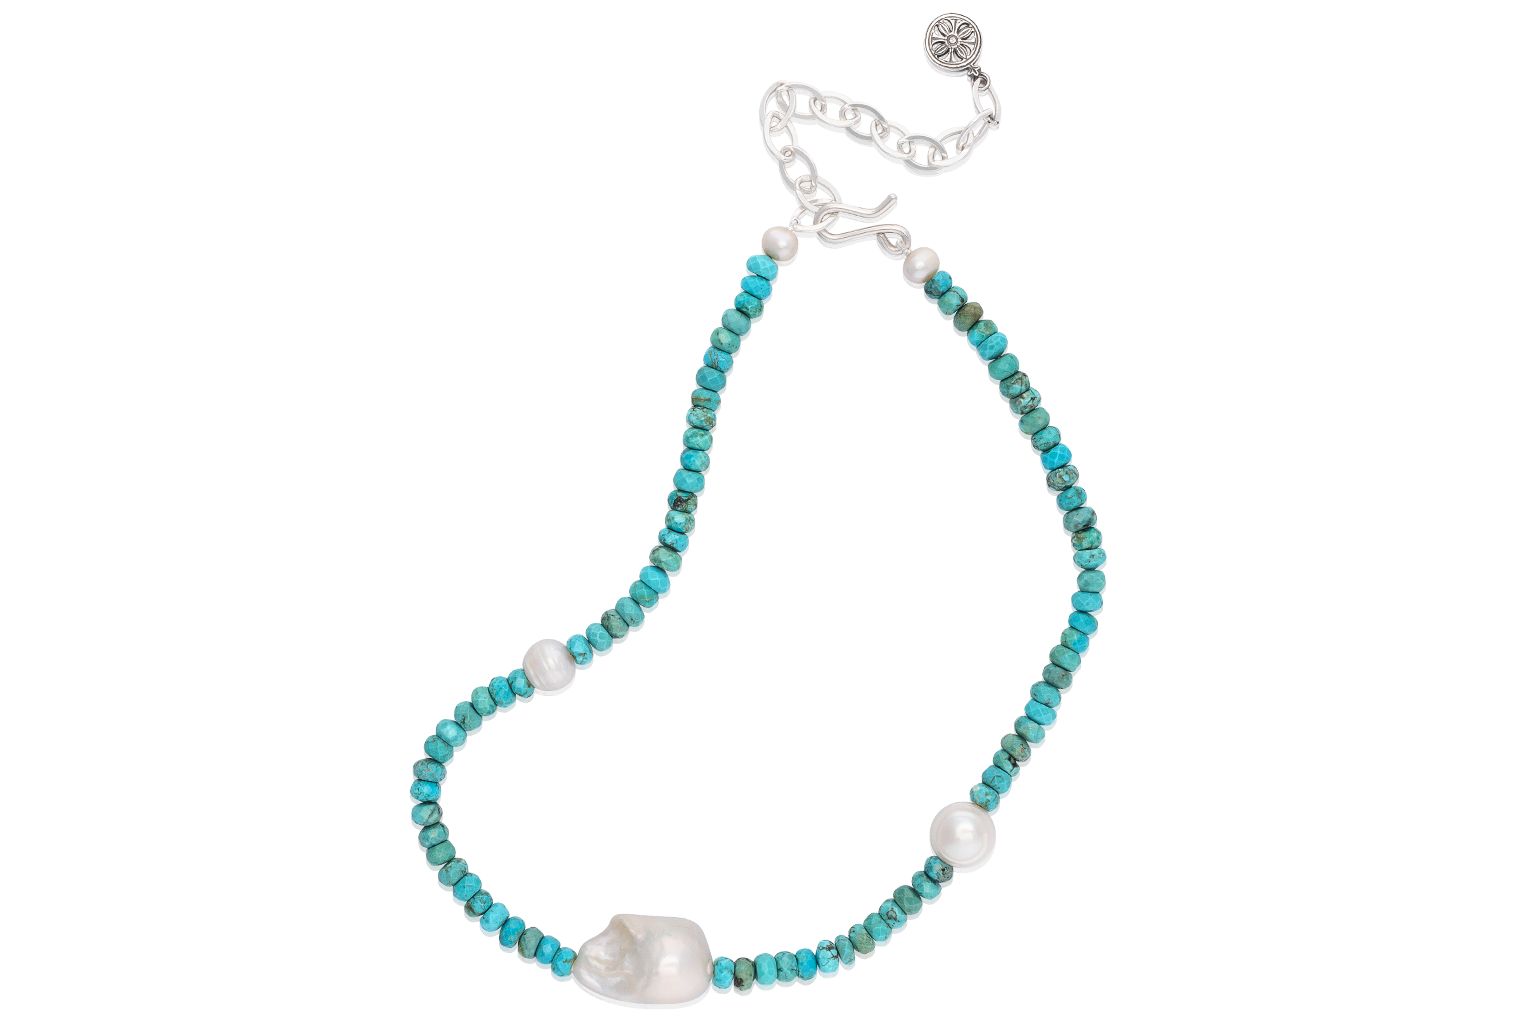 Renaissance Turquoise and Baroque Pearl Necklace | Mignon Faget